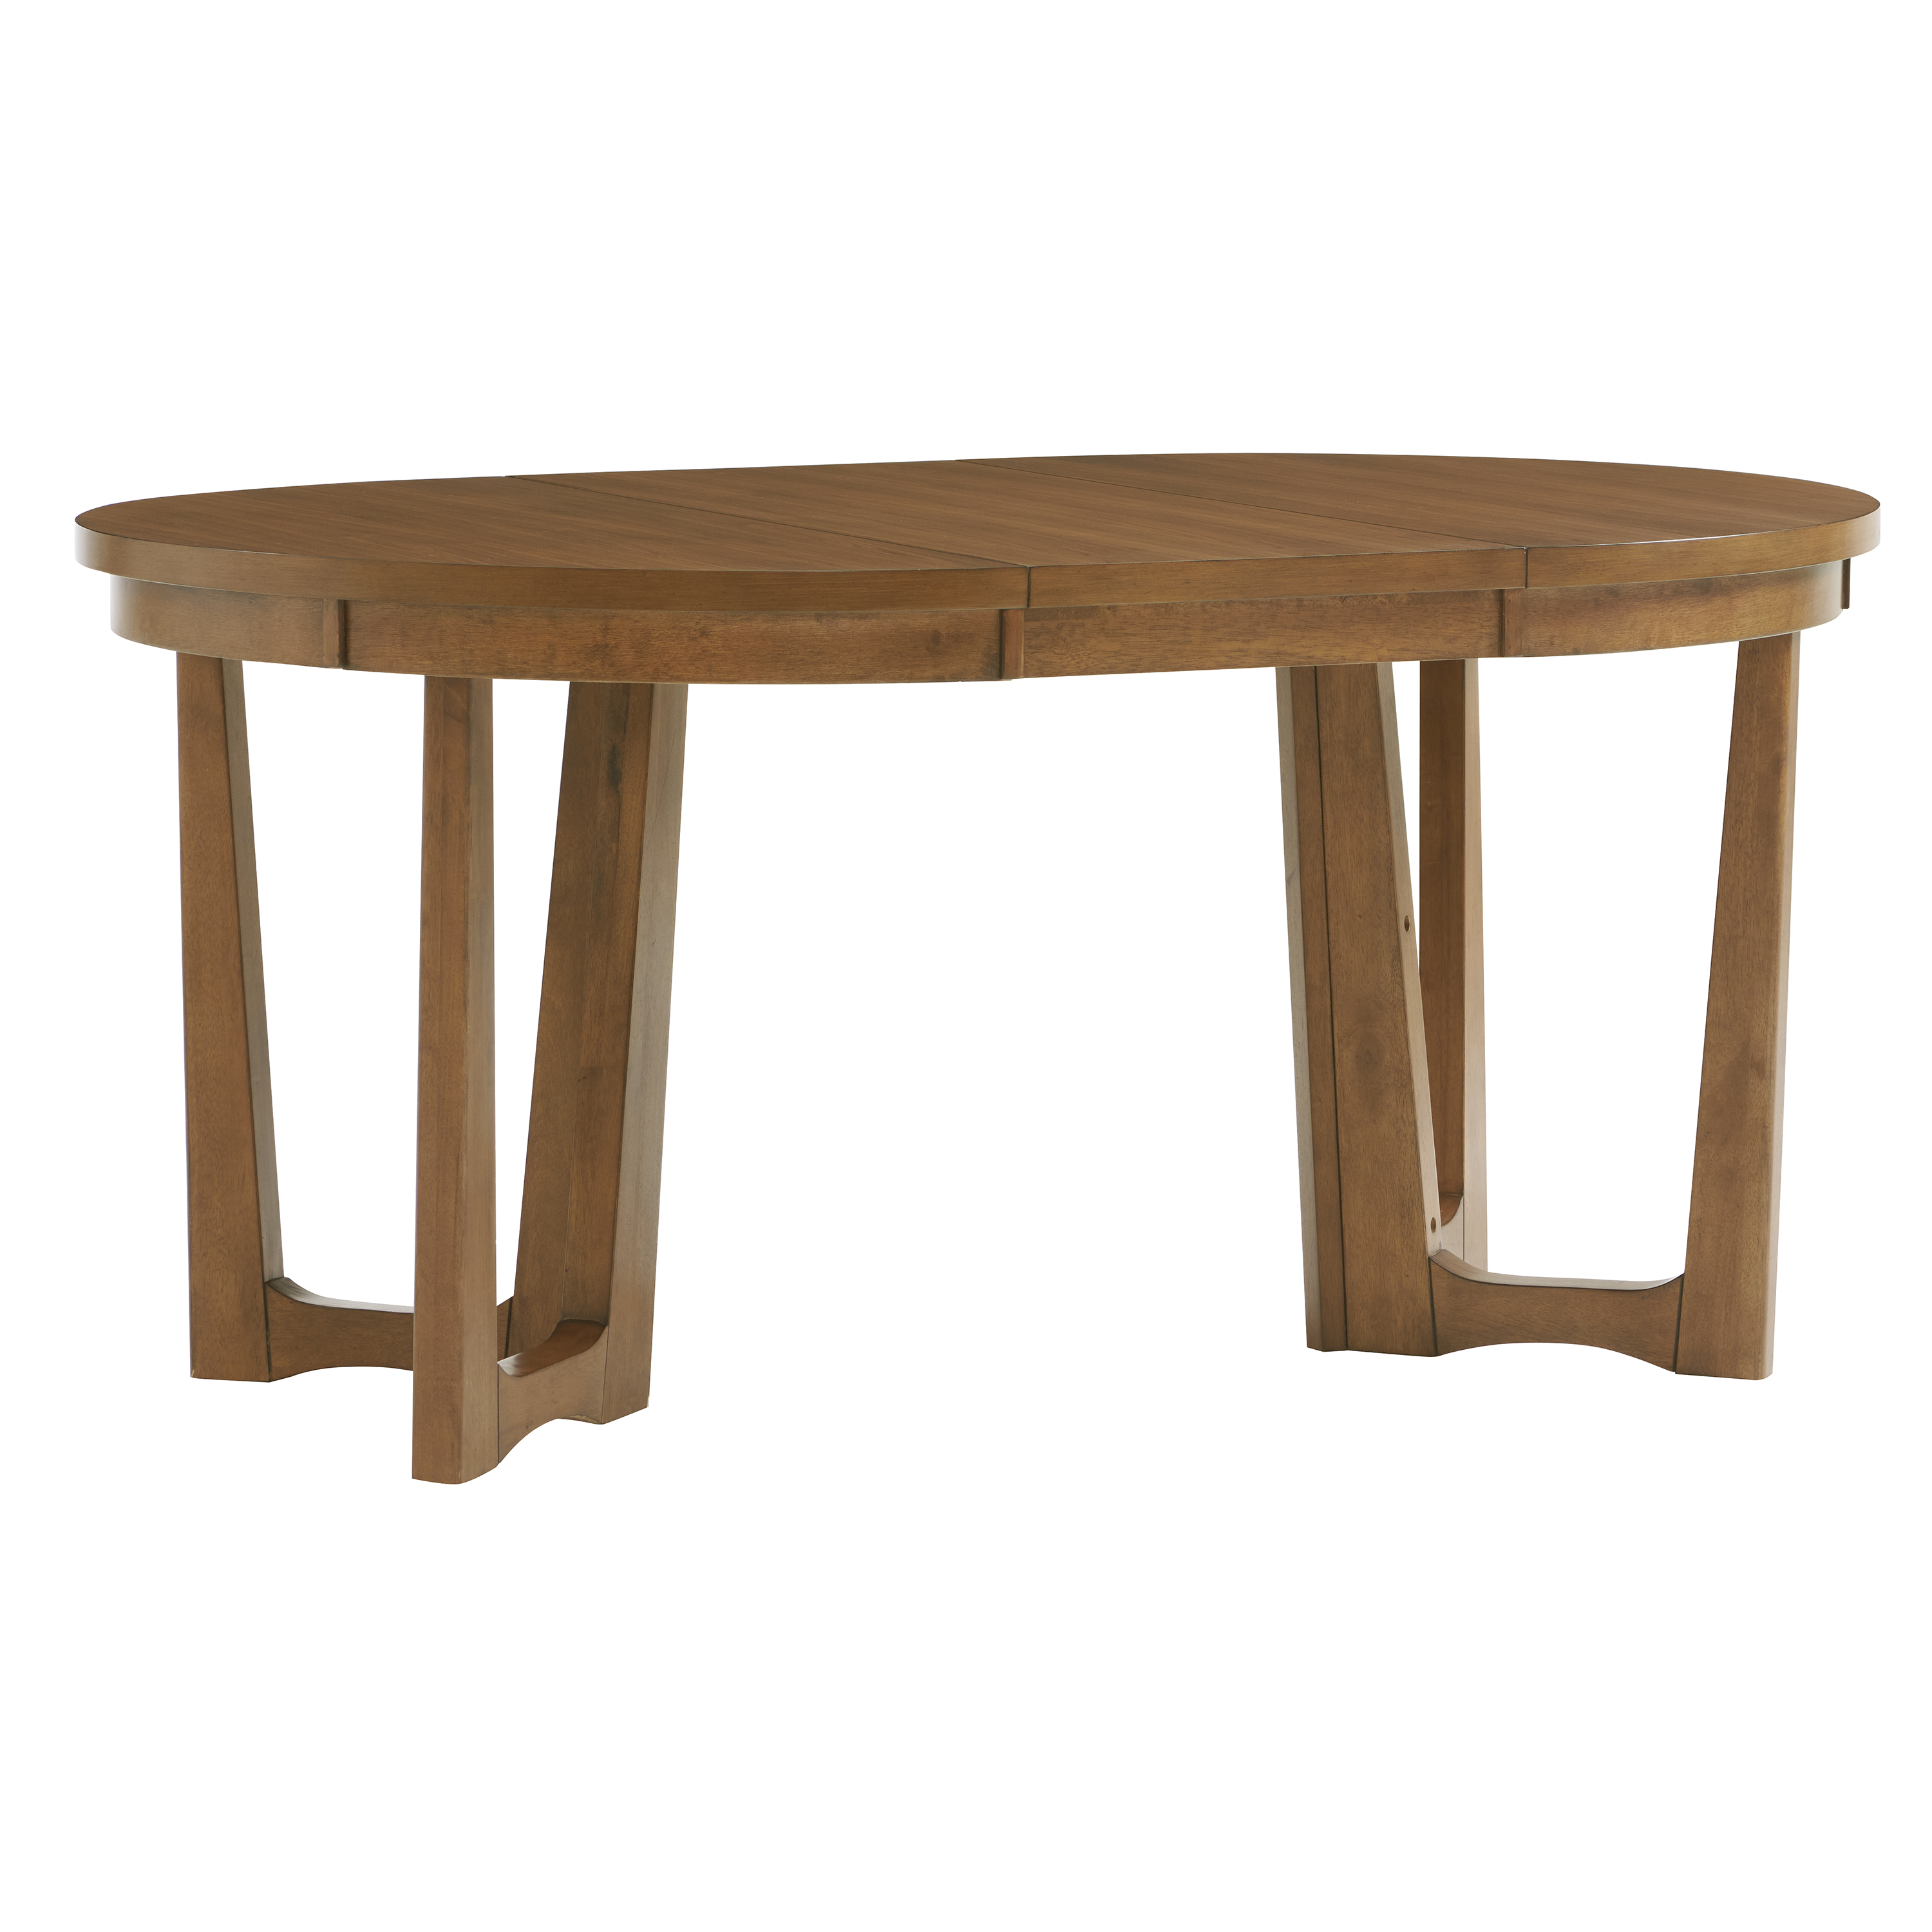 Margo Wood Dining Table